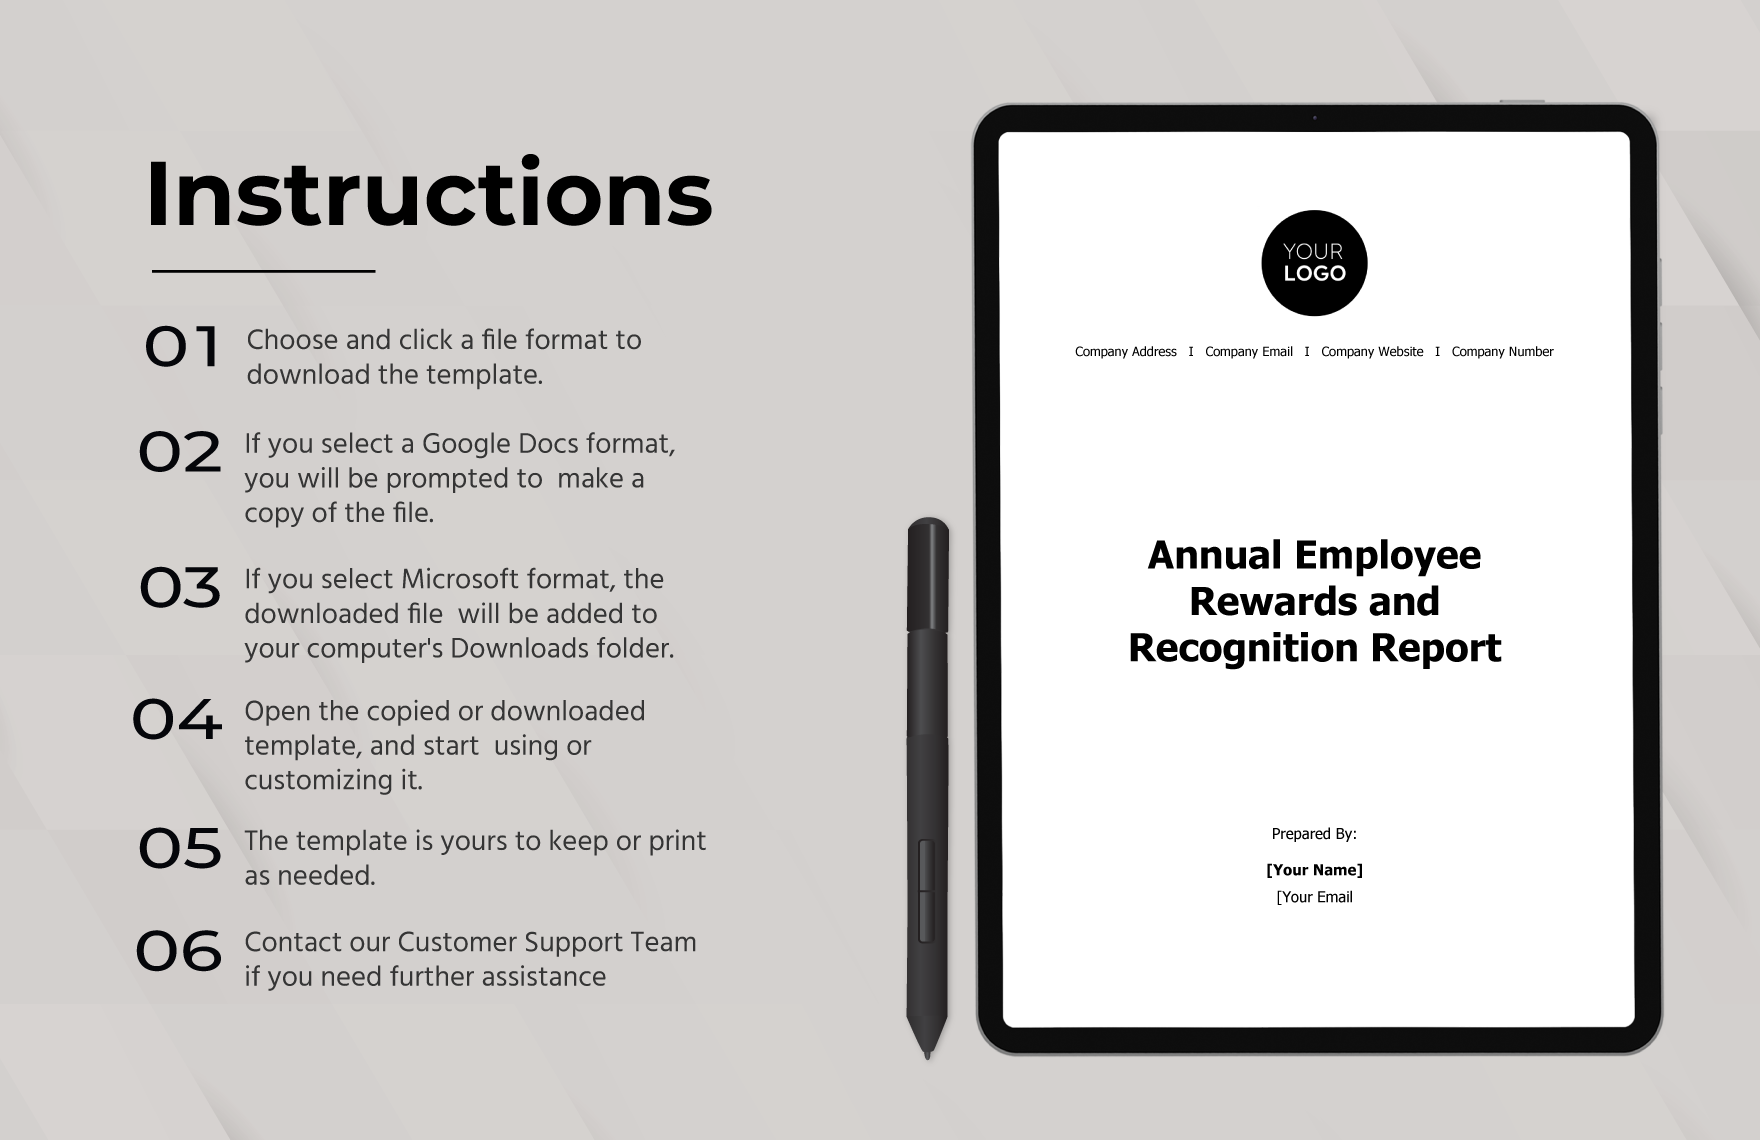 Annual Employee Rewards and Recognition Report HR Template